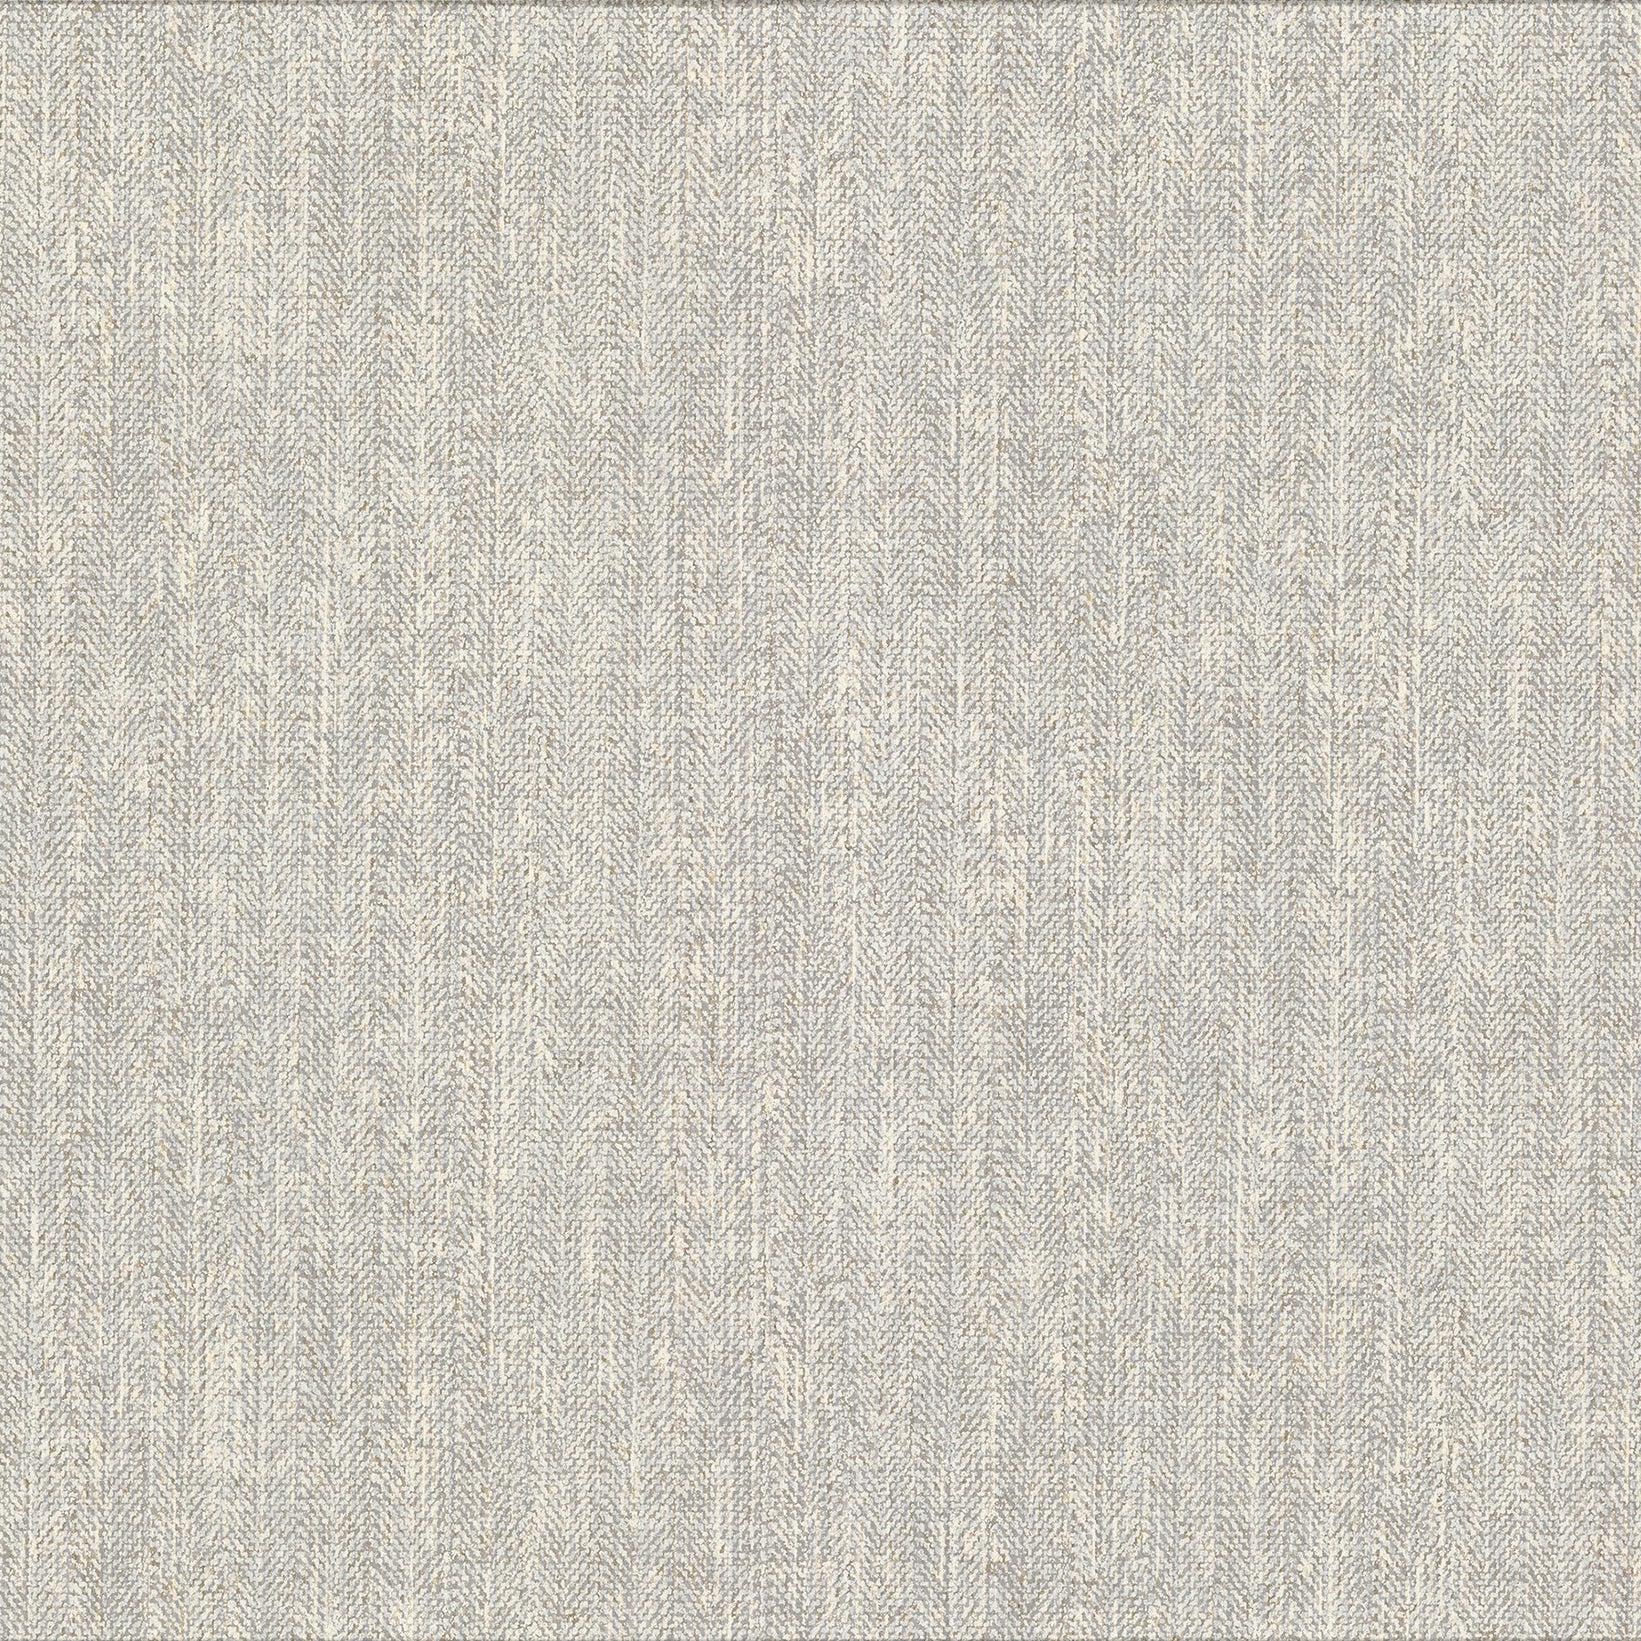 Search 2959-AWNEW-1064 Textural Essentials Soyer Off-White Woven Texture Off-White Brewster Wallpaper